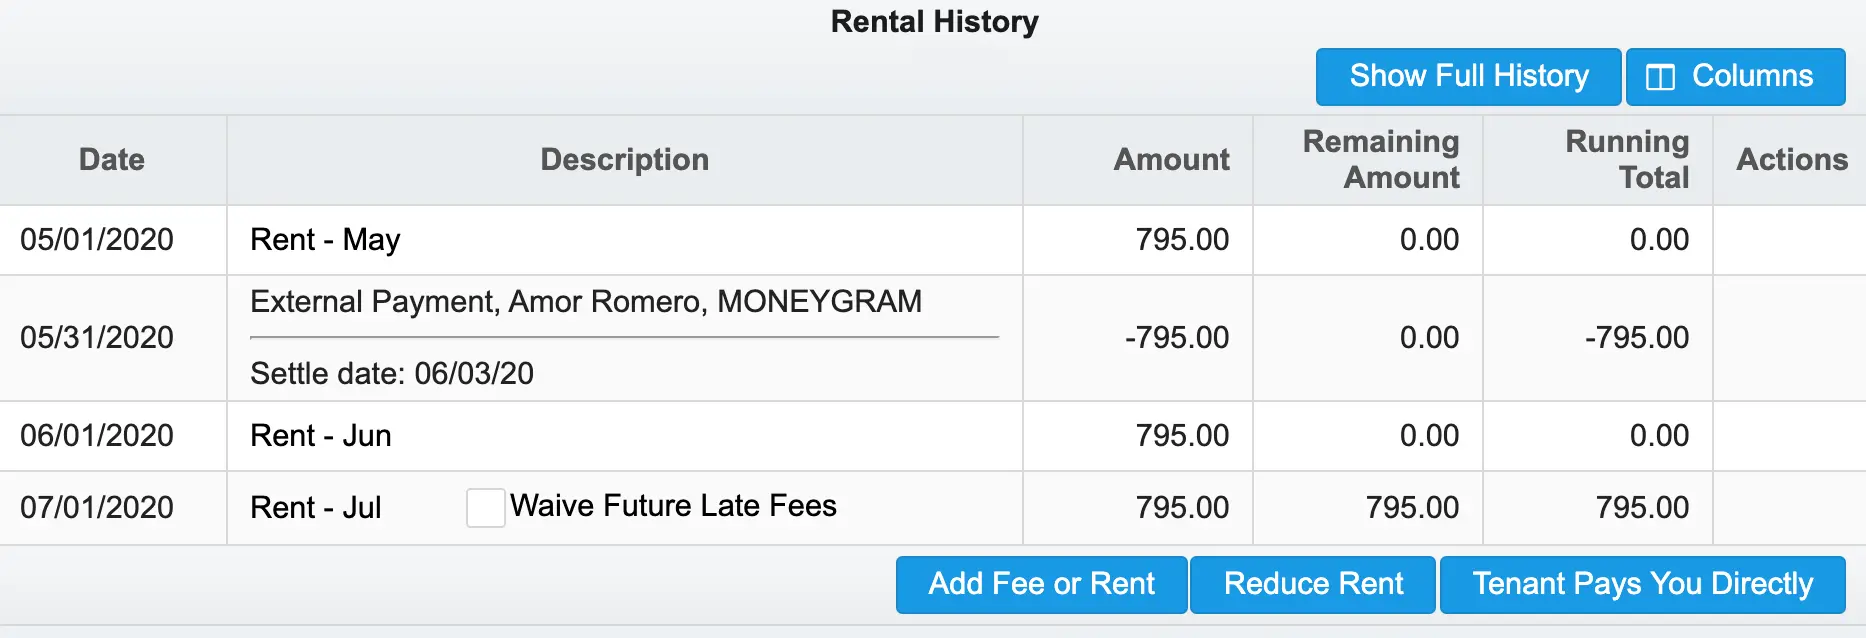 Collect Rent Online - Rental Payment History